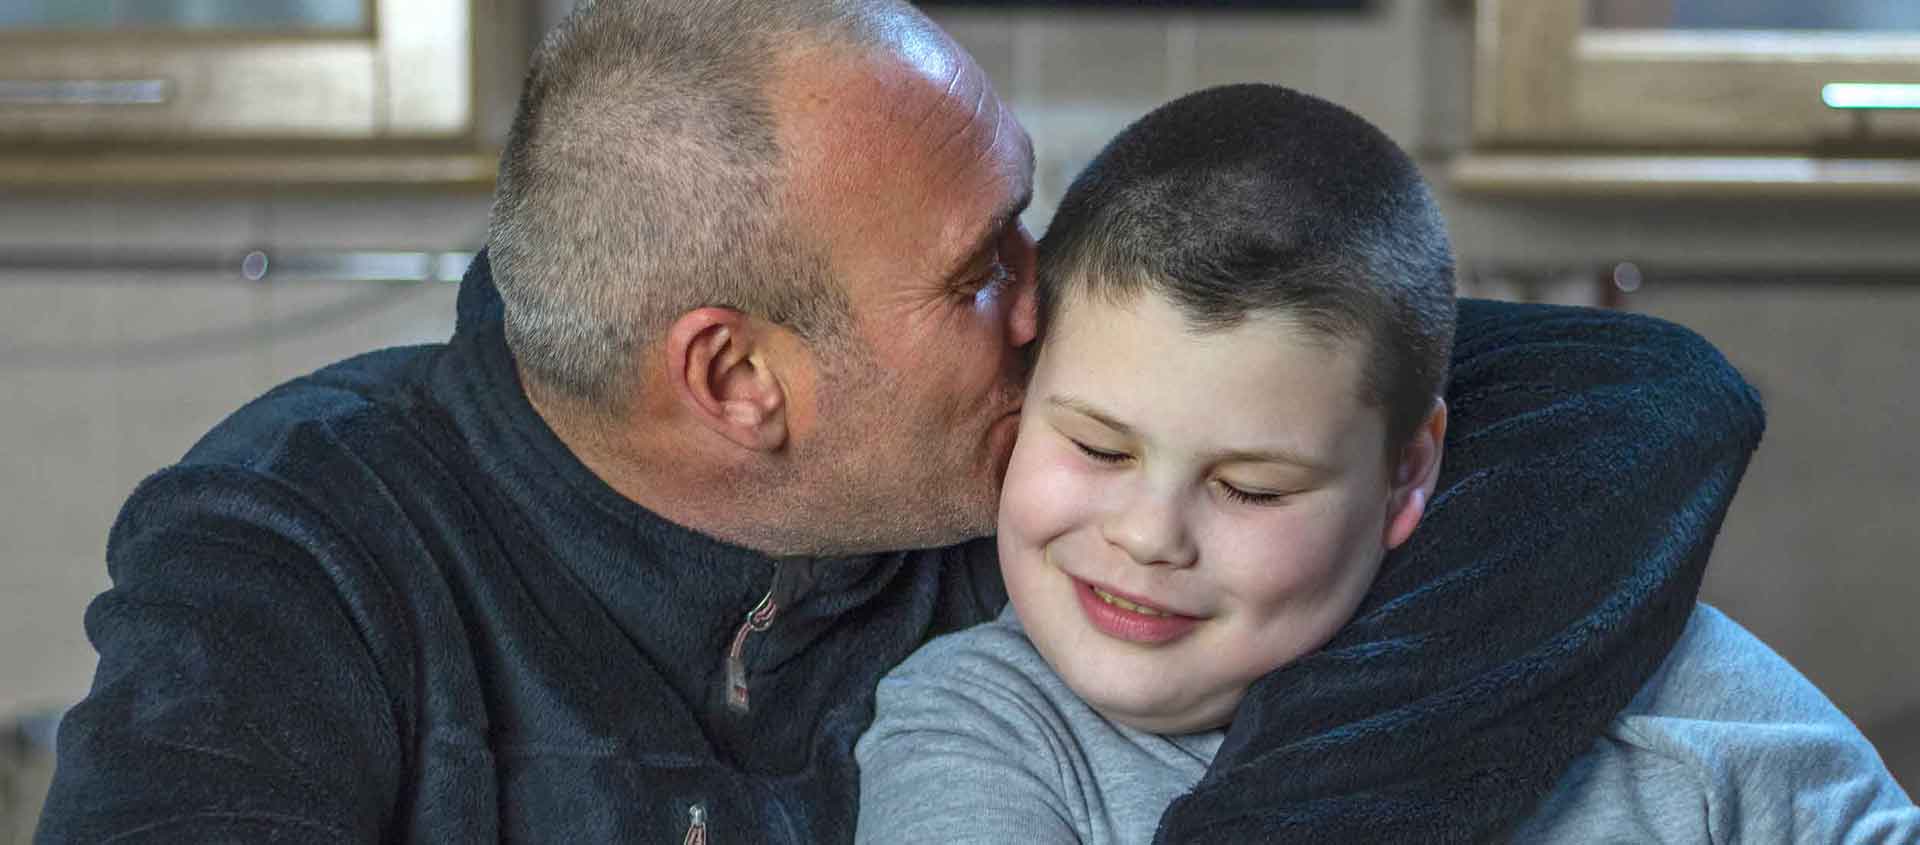 A father cuddles his son and is kissing him on the cheek.